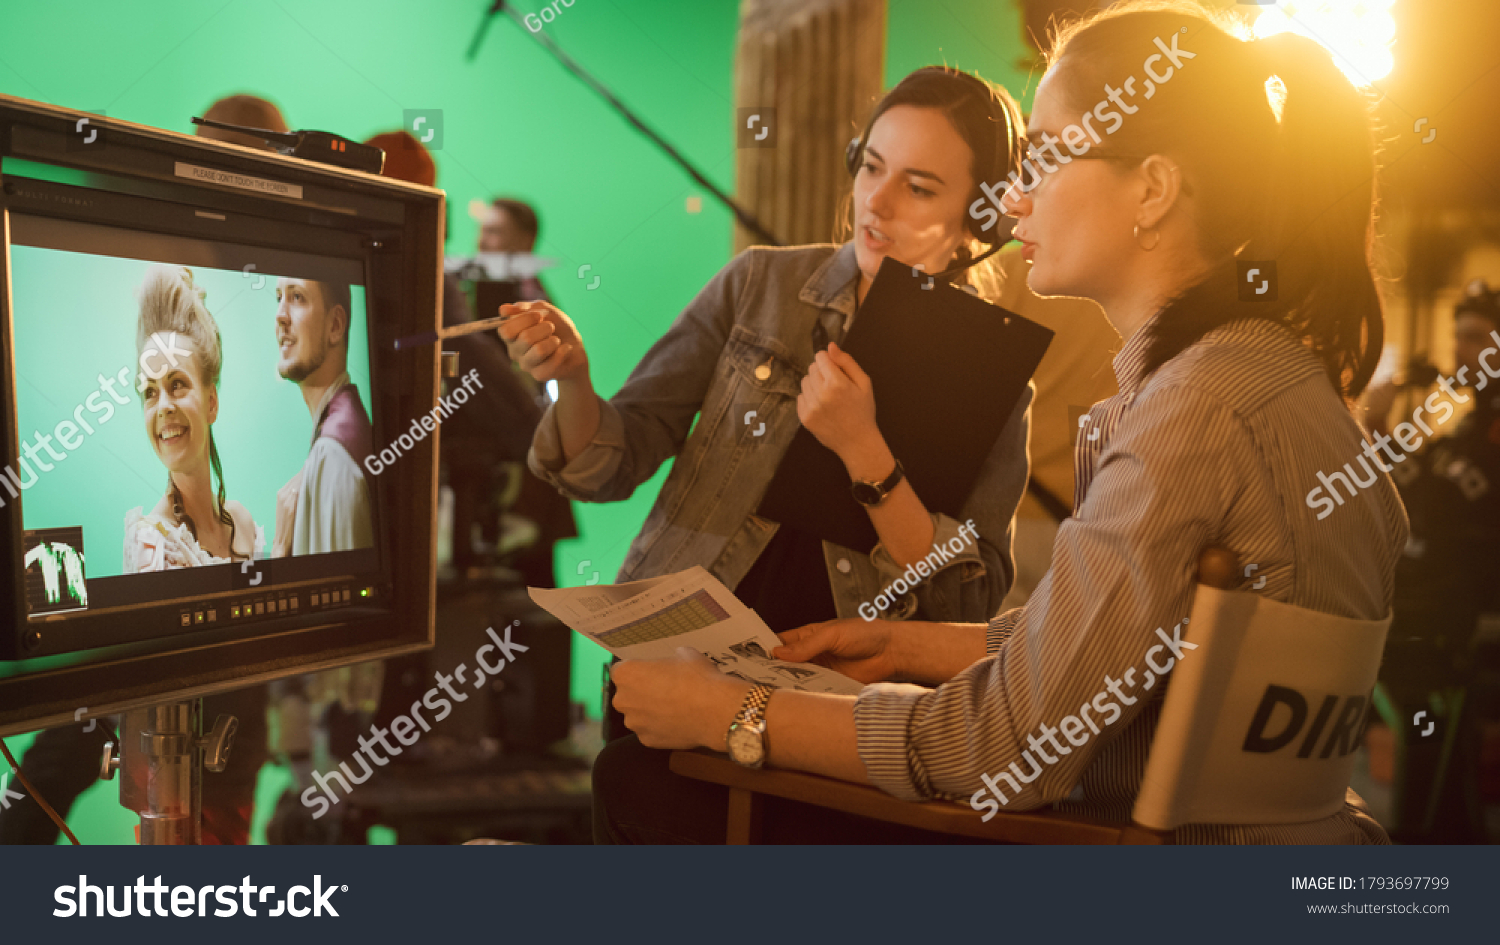 Famous Talented Female Director in Chair Looks at Display talks with Assistant, Shooting Blockbuster. Green Screen Scene in Historical Drama. Film Studio Set Professional Crew Doing High Budget Movie #1793697799